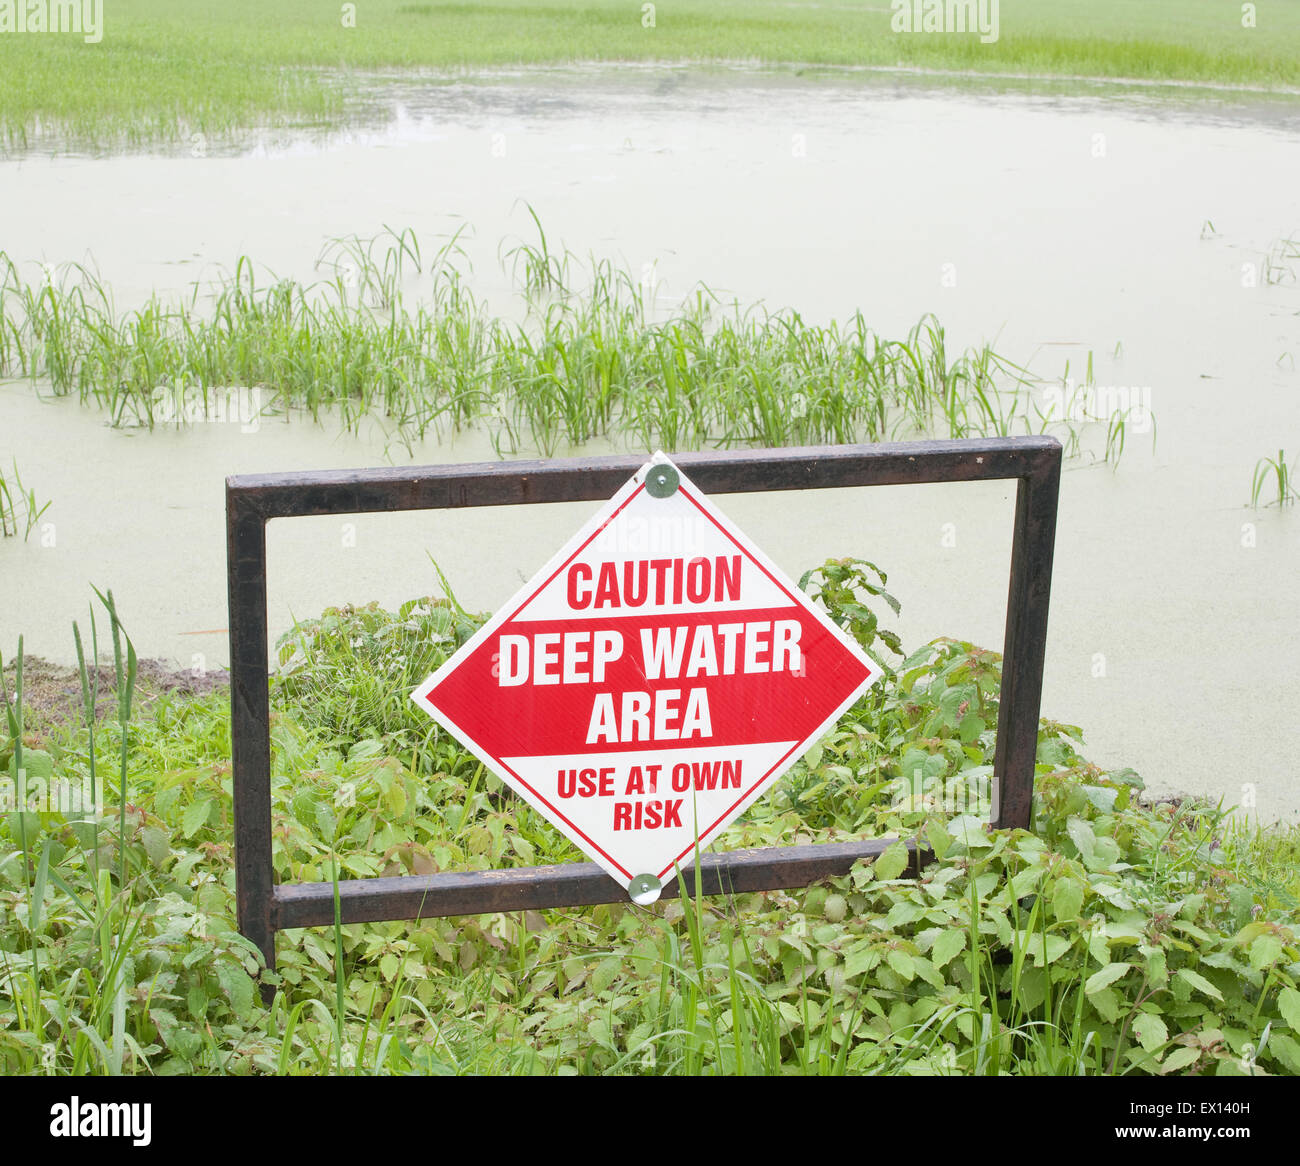 Deep water caution sign in wetland area. Stock Photo